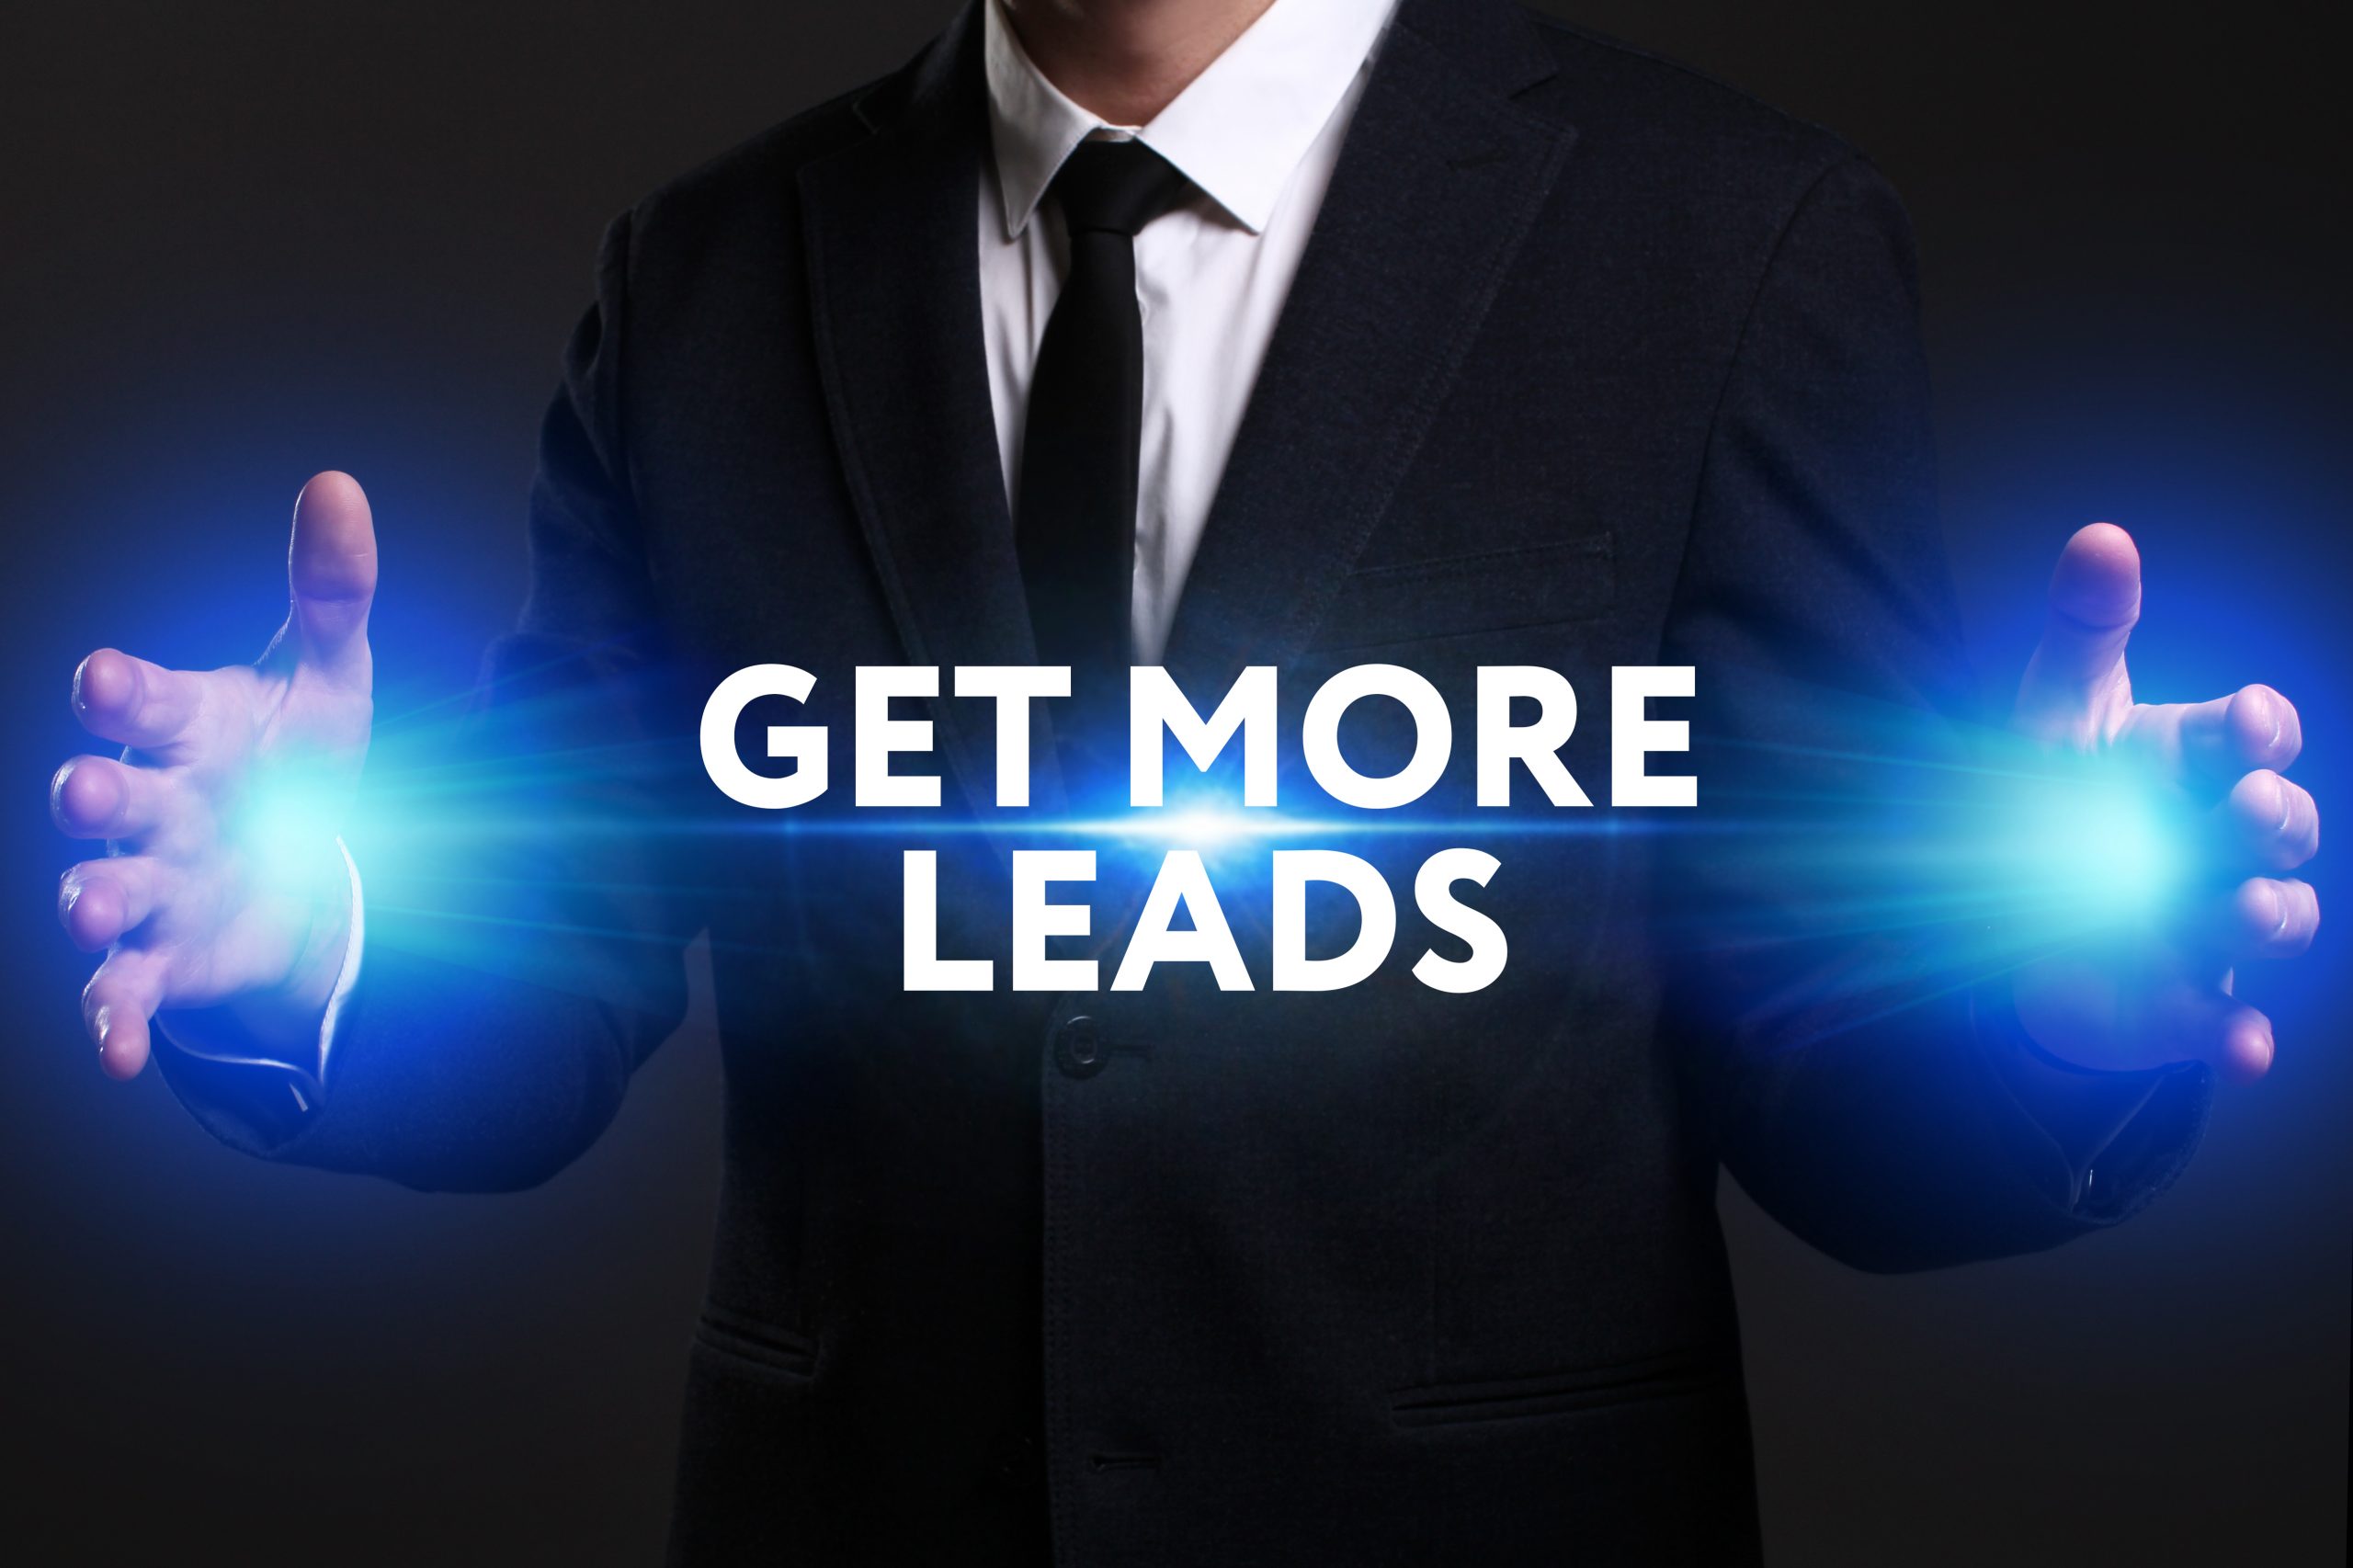 SEO services for Lead Generation